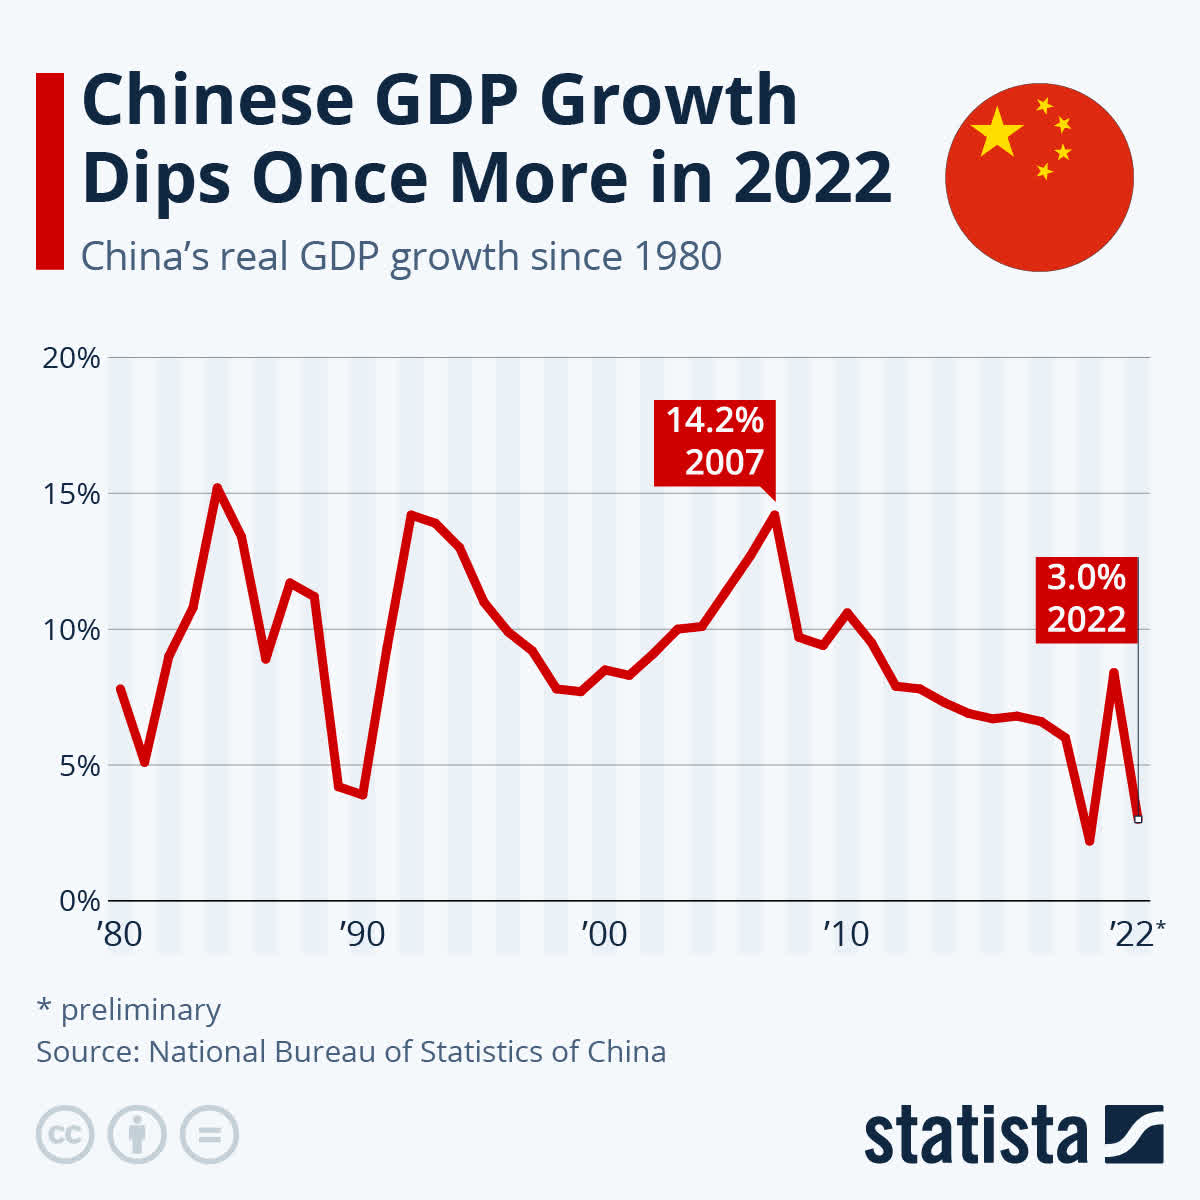 Chart: Chinese GDP Growth Dips Once More in 2022 | Statista